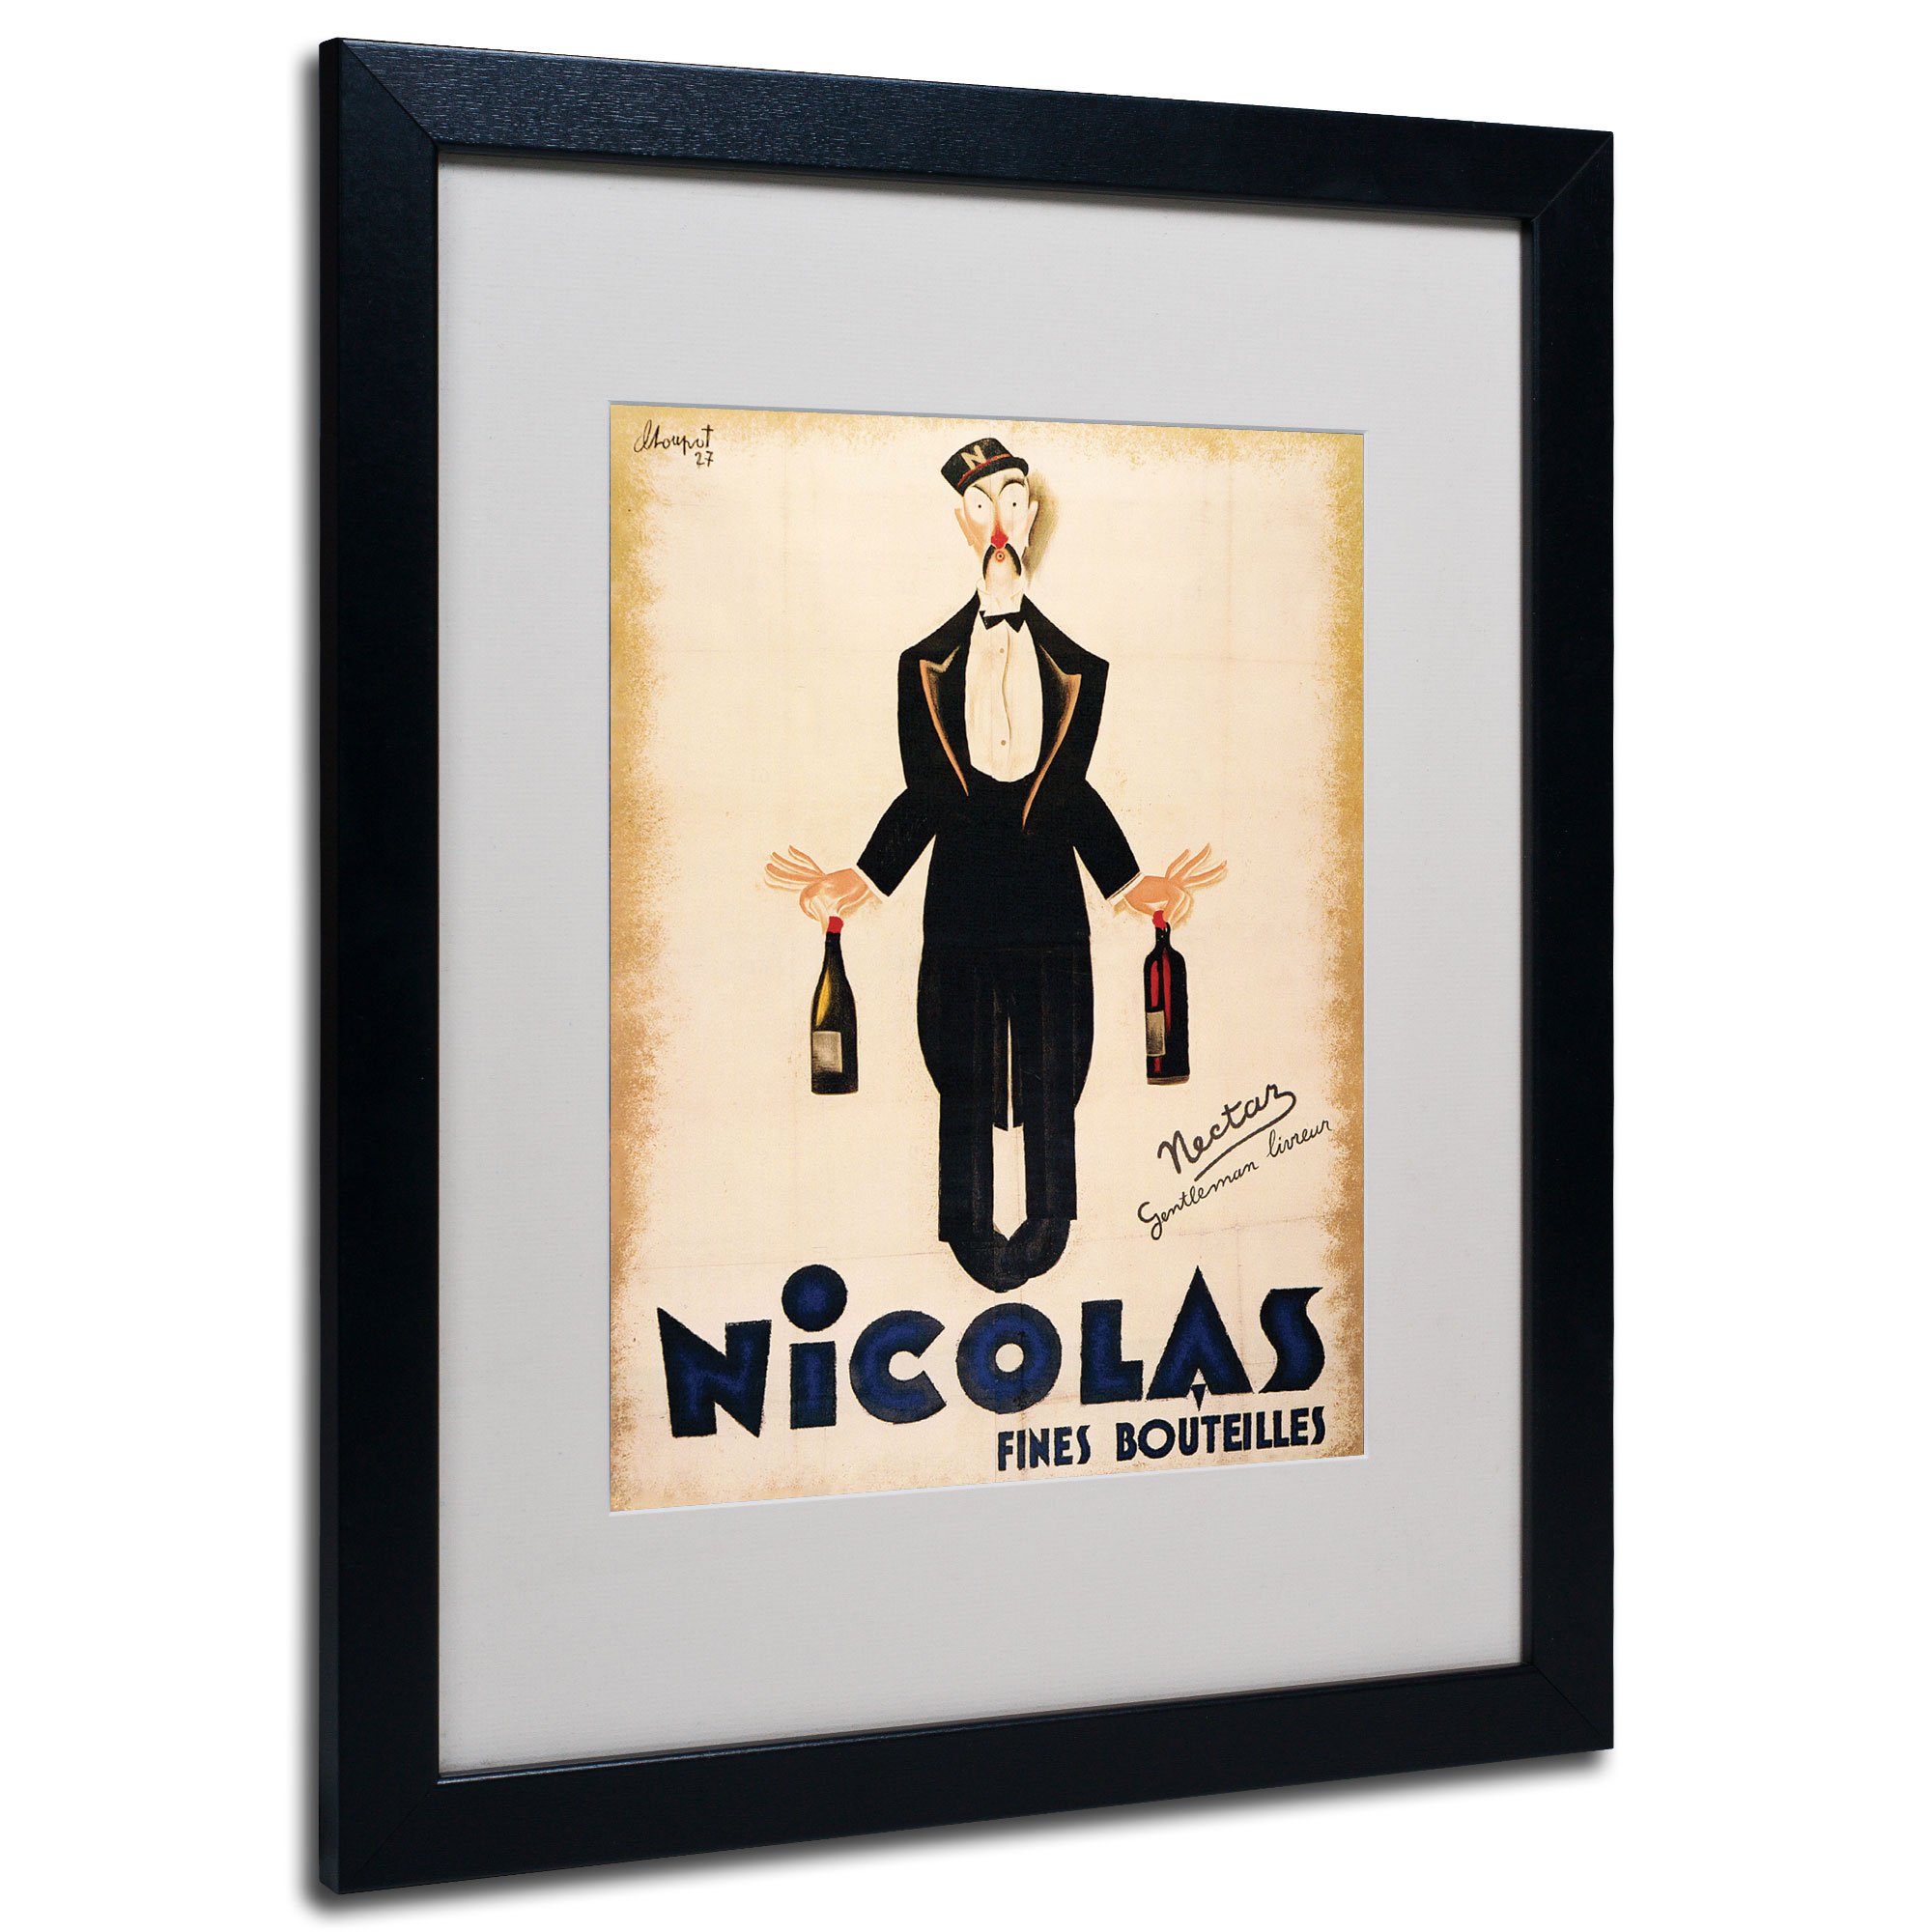 0886511190443 - 'NICOLAS FINES BOUTEILLES' FRAMED MATTED ART